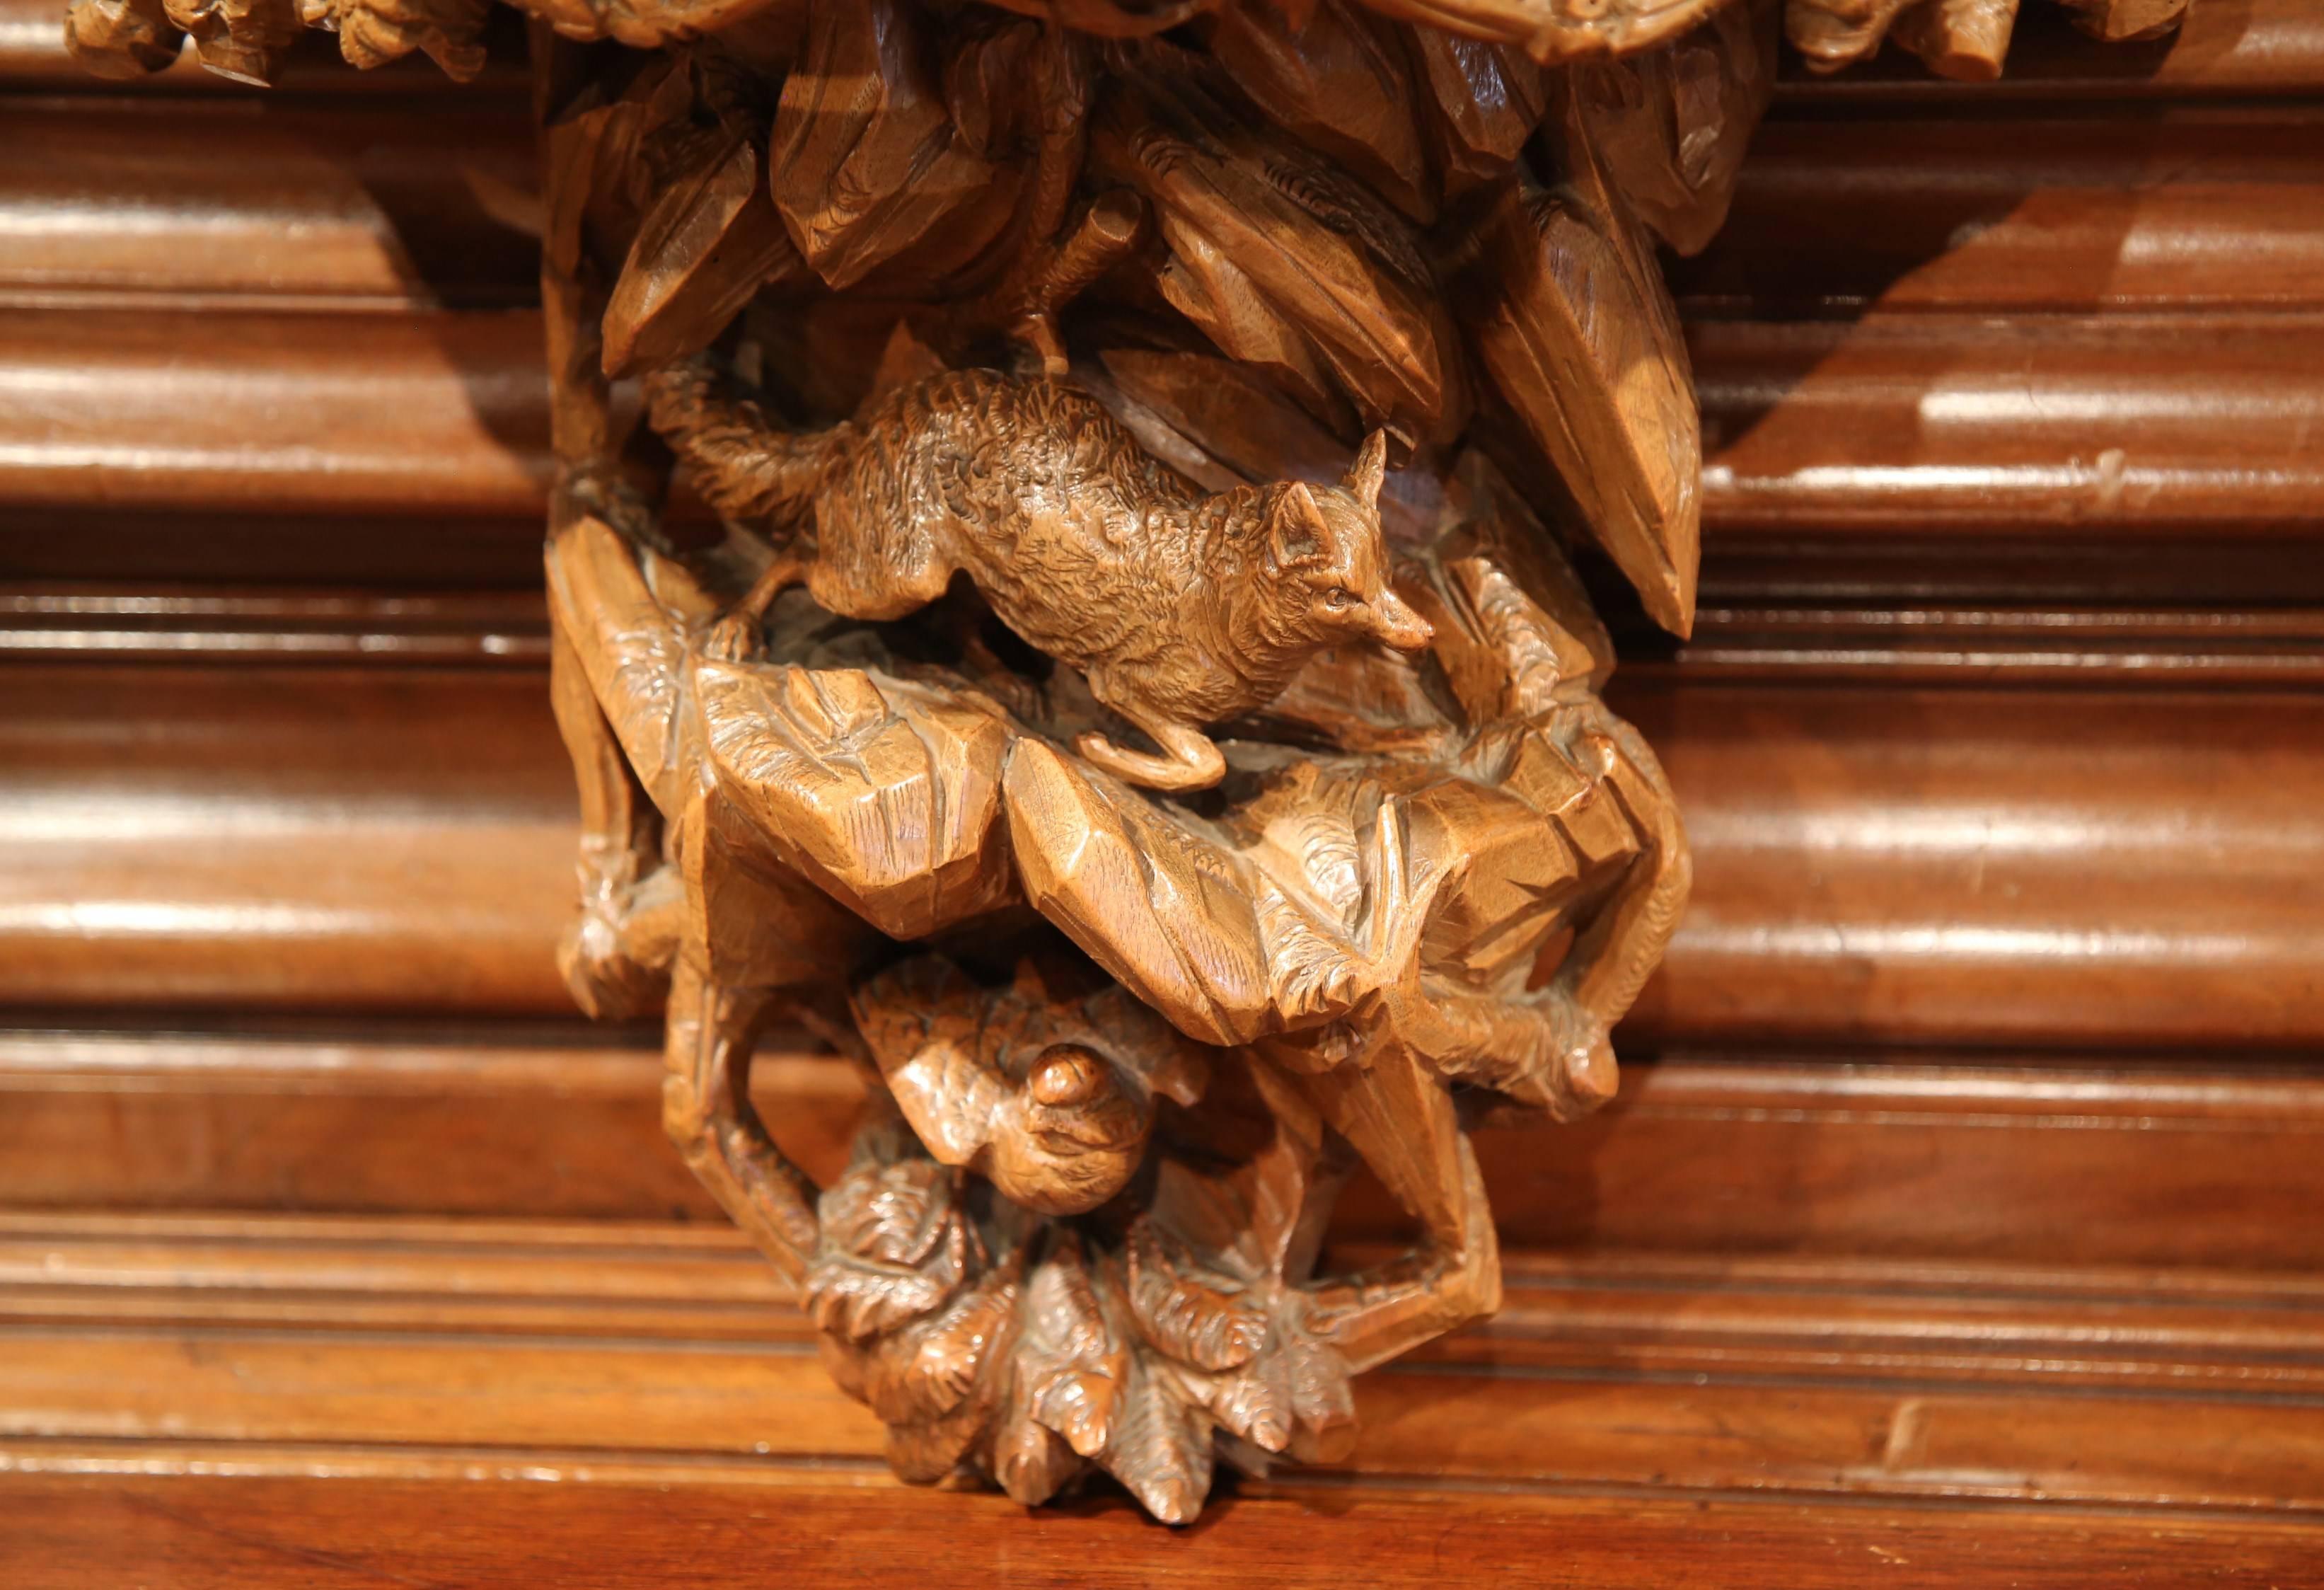 This beautifully antique wall bracket was carved in the Alps Mountains of France, circa 1880. Half circle in shape, the fruitwood shelf console features fine hand carved nature motifs including a fox, bird, foliage and branches. The piece is in